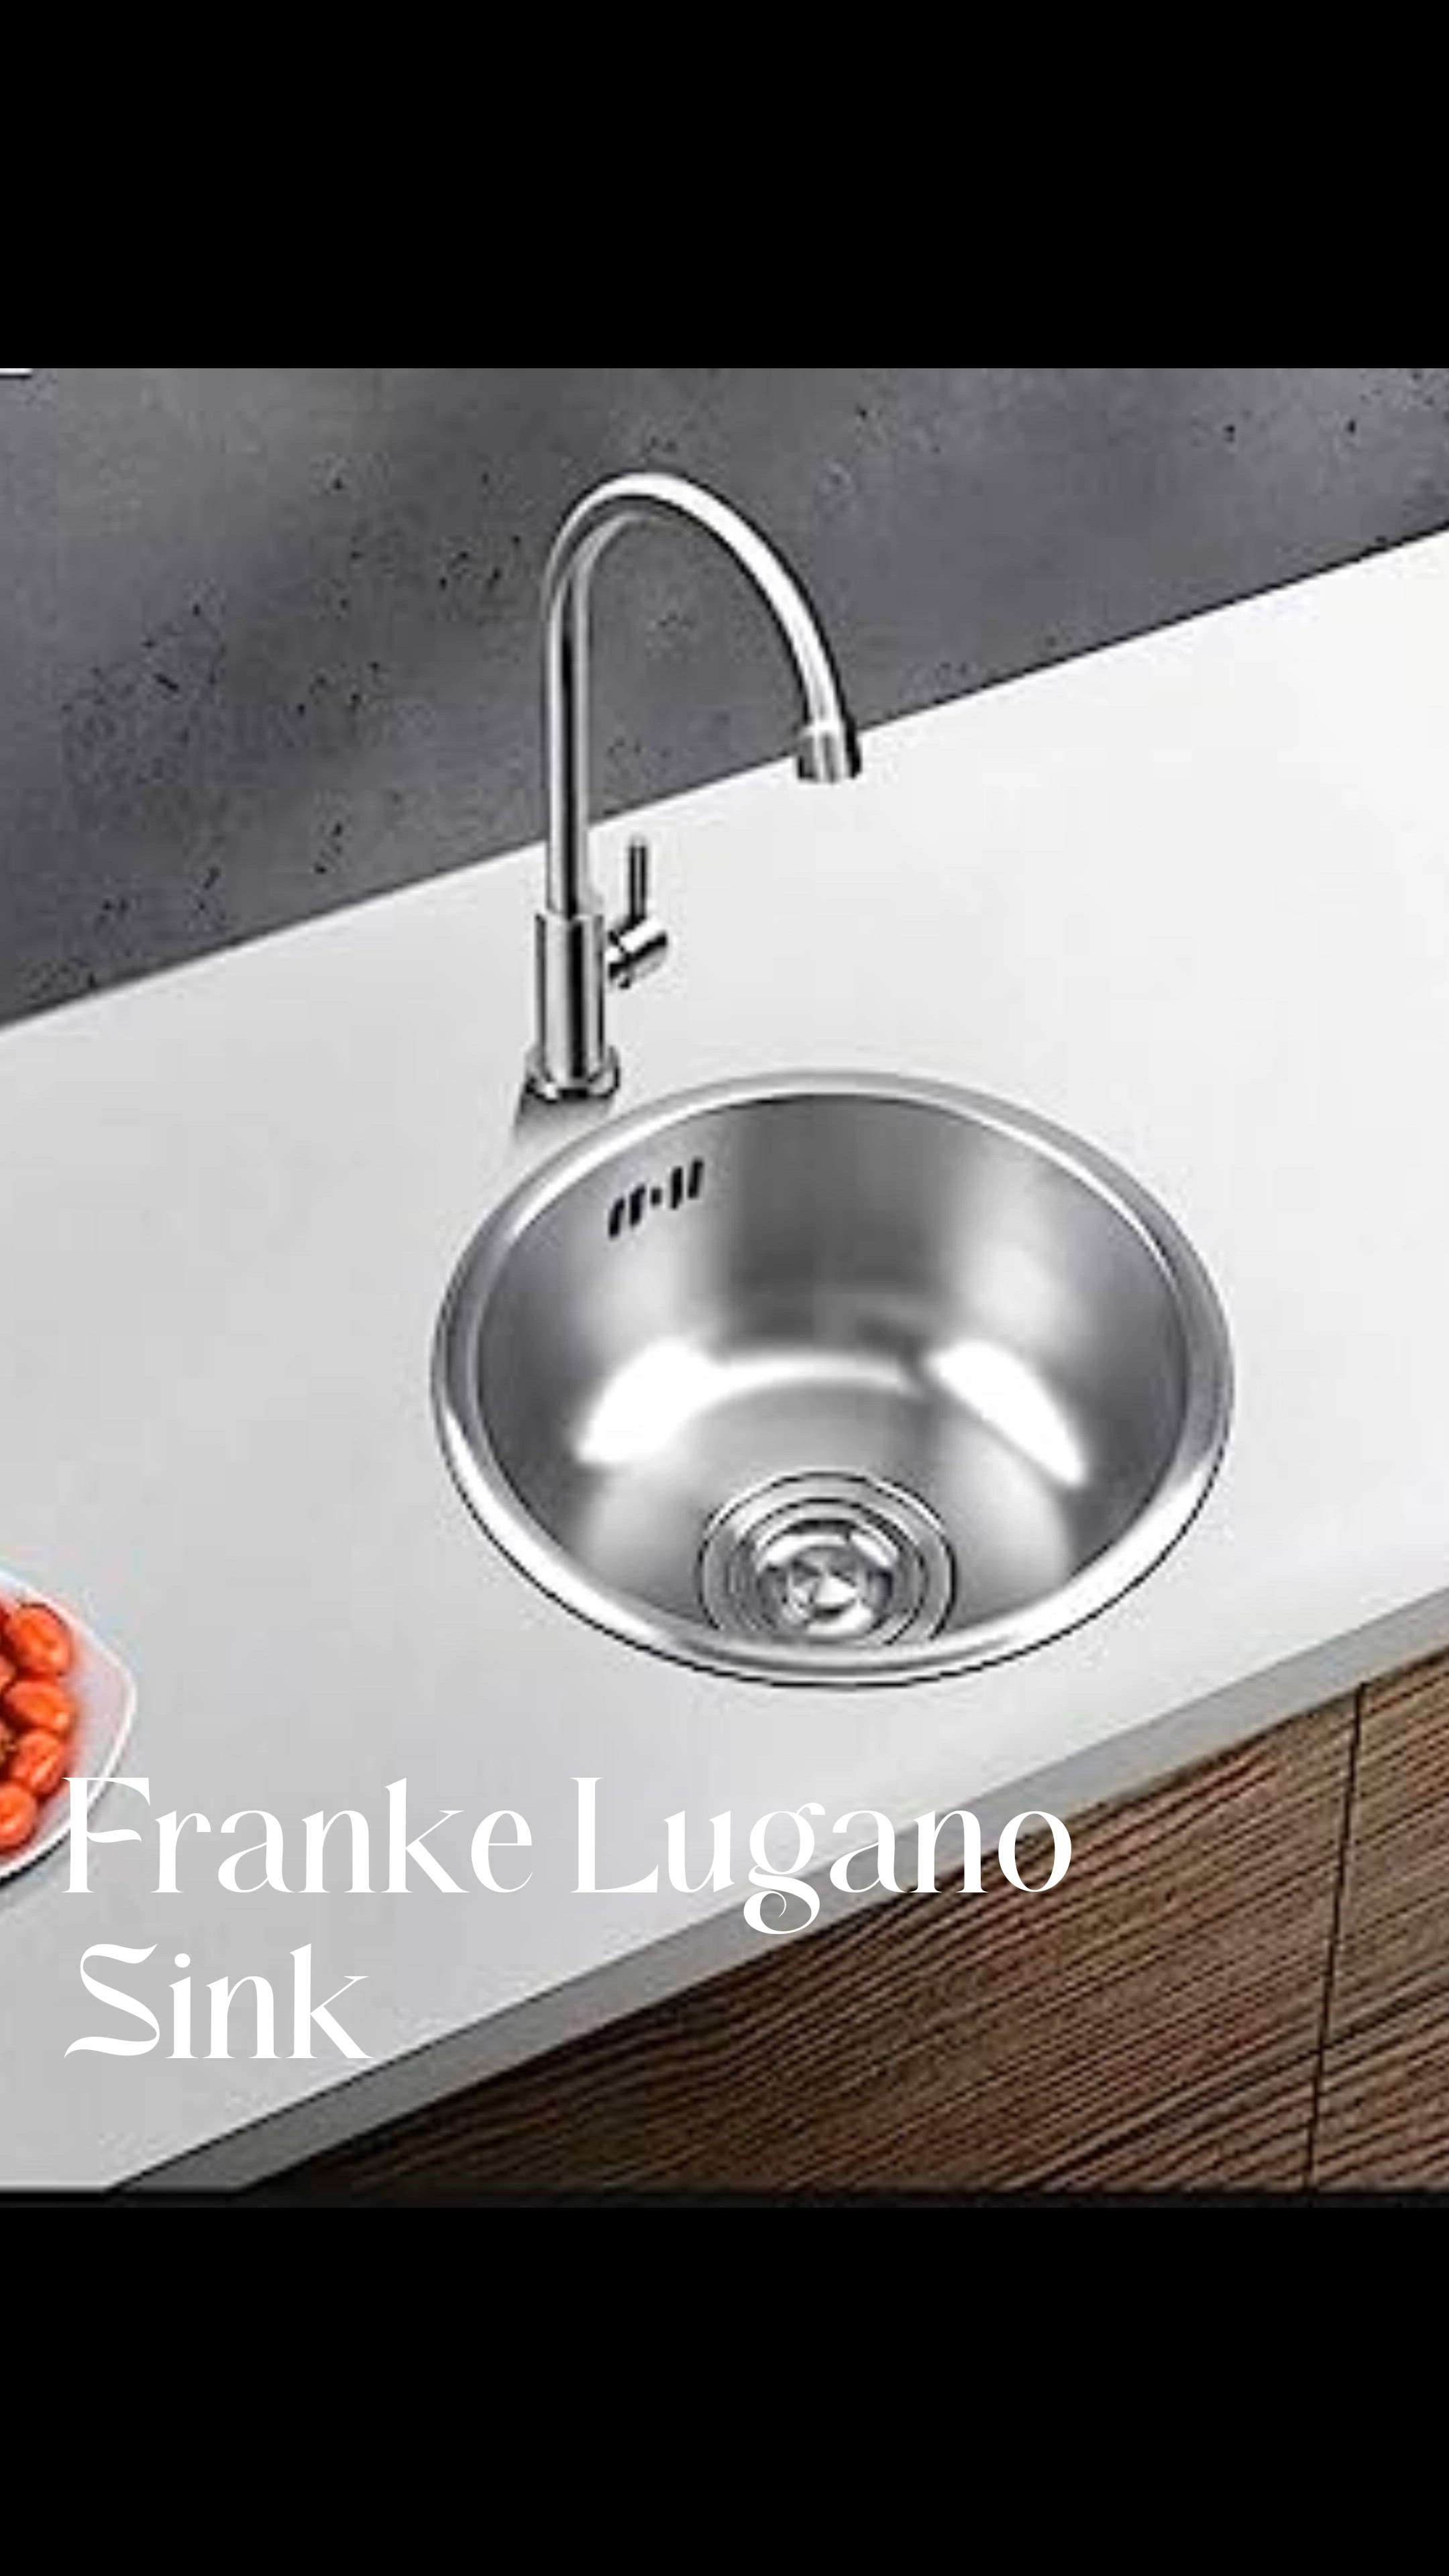 FRANKE LUGANO EUROPEAN SATIN FINISH SINK
SERIES: LUGANO
ROUND KITCHEN SINK WITH DRAIN BOARD
FEATURES : 1mm THICKNESS STAINLESS STEEL MATERIAL, OVERFLOW COUPLER TECHNOLOGY WHICH HELPS TO AVOID WATER SPILL OVER FROM THE SINK,EUROPIAN STAIN FINISH.

 #franke #kitchen #sink #lugano #satinfinish #sanitaryshopping #bestprice #modernkitchen #germfreesink